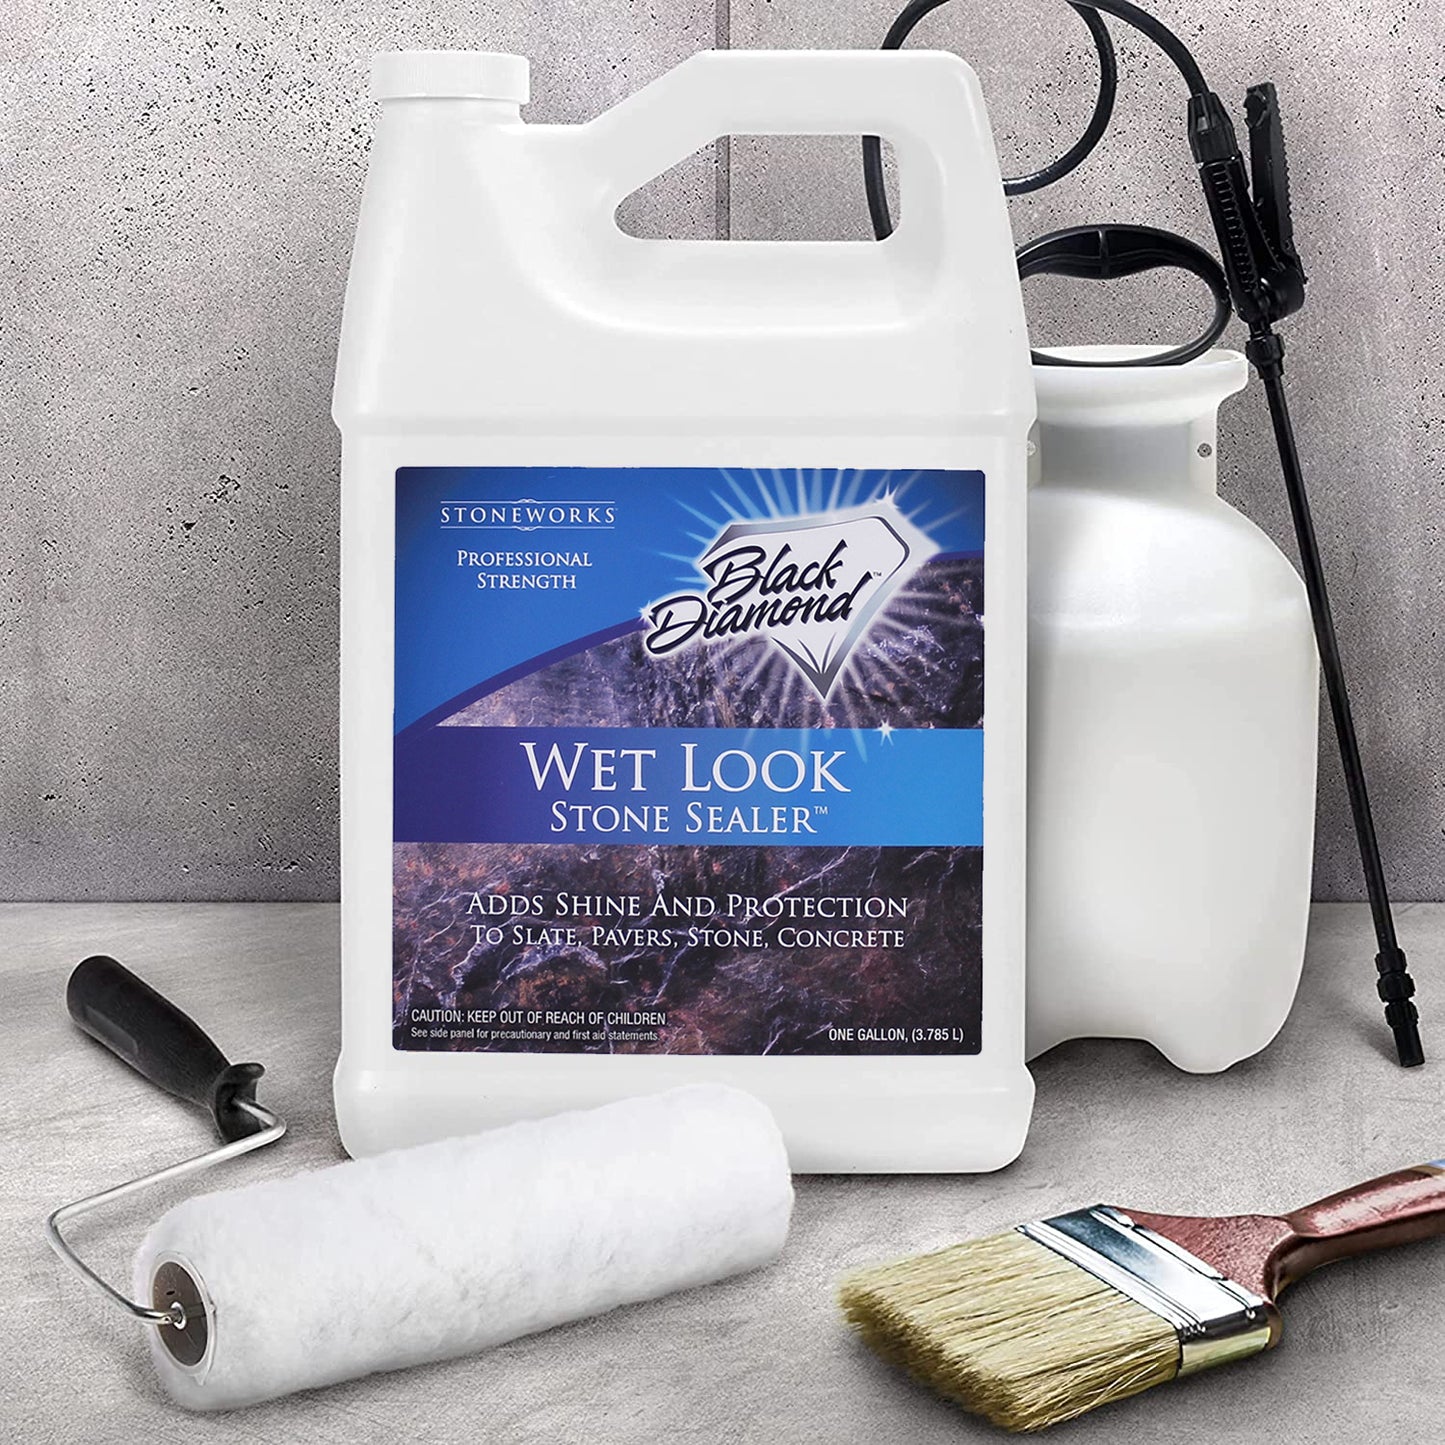 Black Diamond Stoneworks Wet Look Natural Stone Sealer Provides Durable Gloss and Protection to: Pavers, Slate, Concrete, Sandstone, Driveways, Garage Floors. Interior or Exterior.